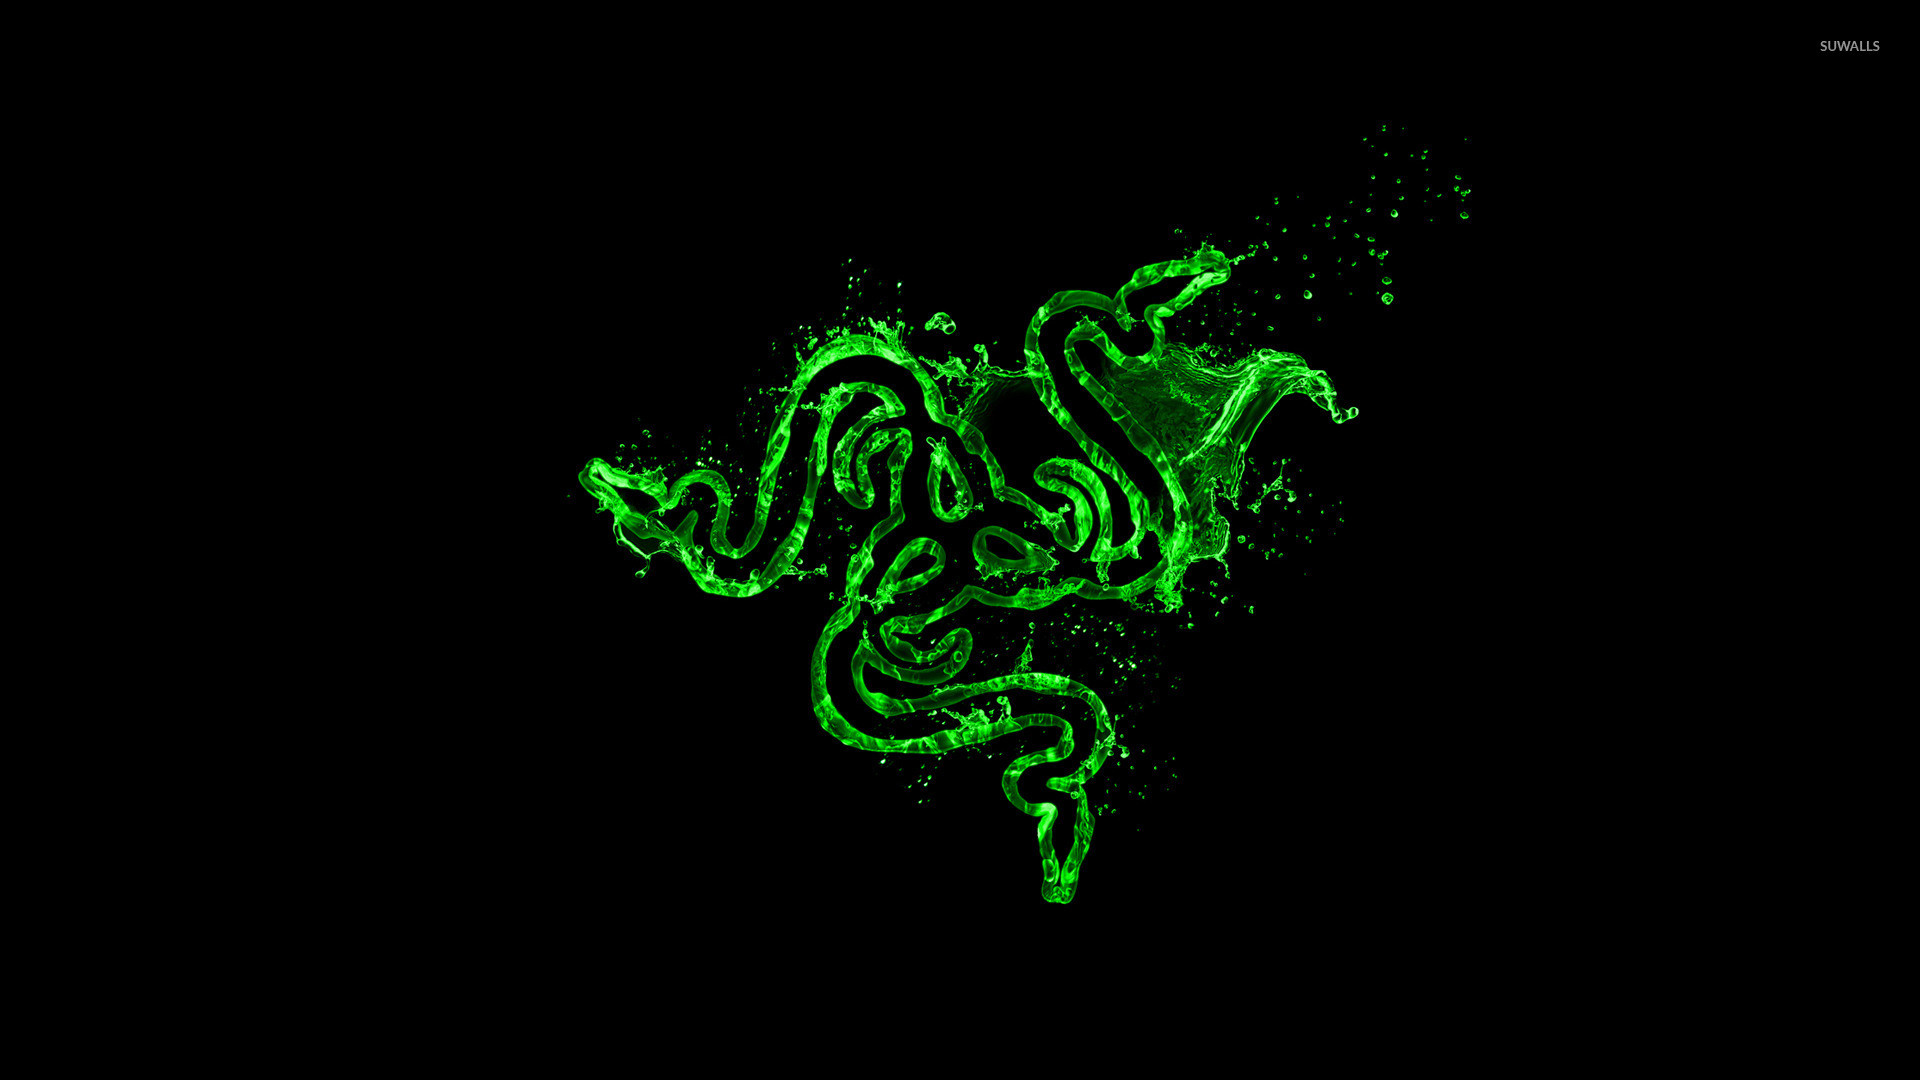 1920x1080 Razer Wallpapers | Places to Visit | Pinterest | Game and Wallpapers